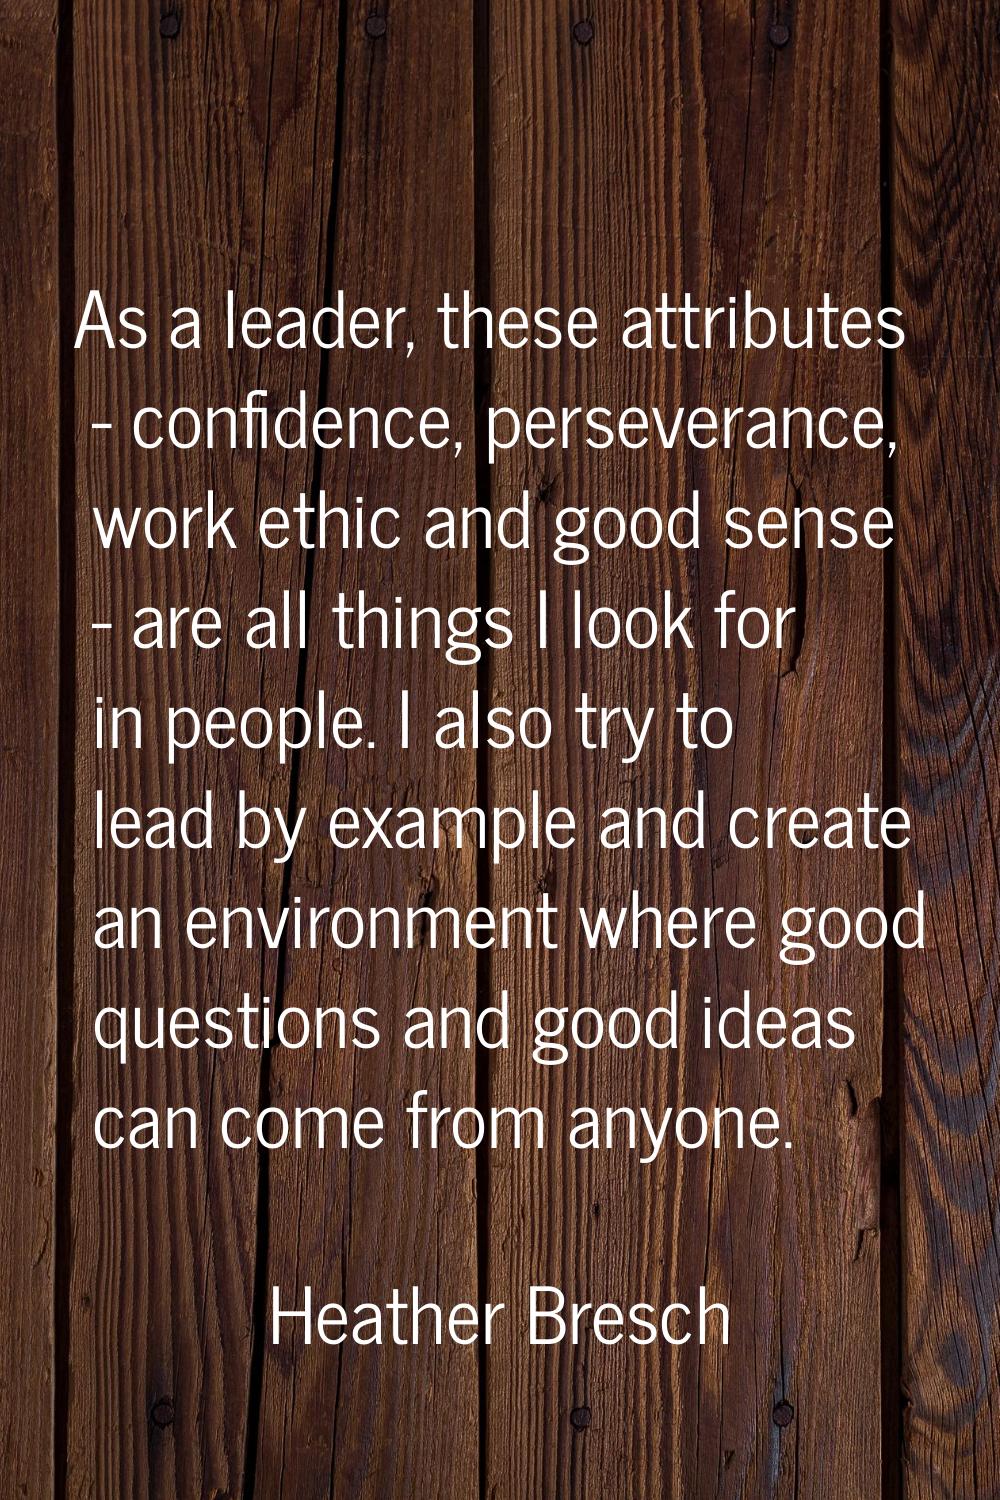 As a leader, these attributes - confidence, perseverance, work ethic and good sense - are all thing